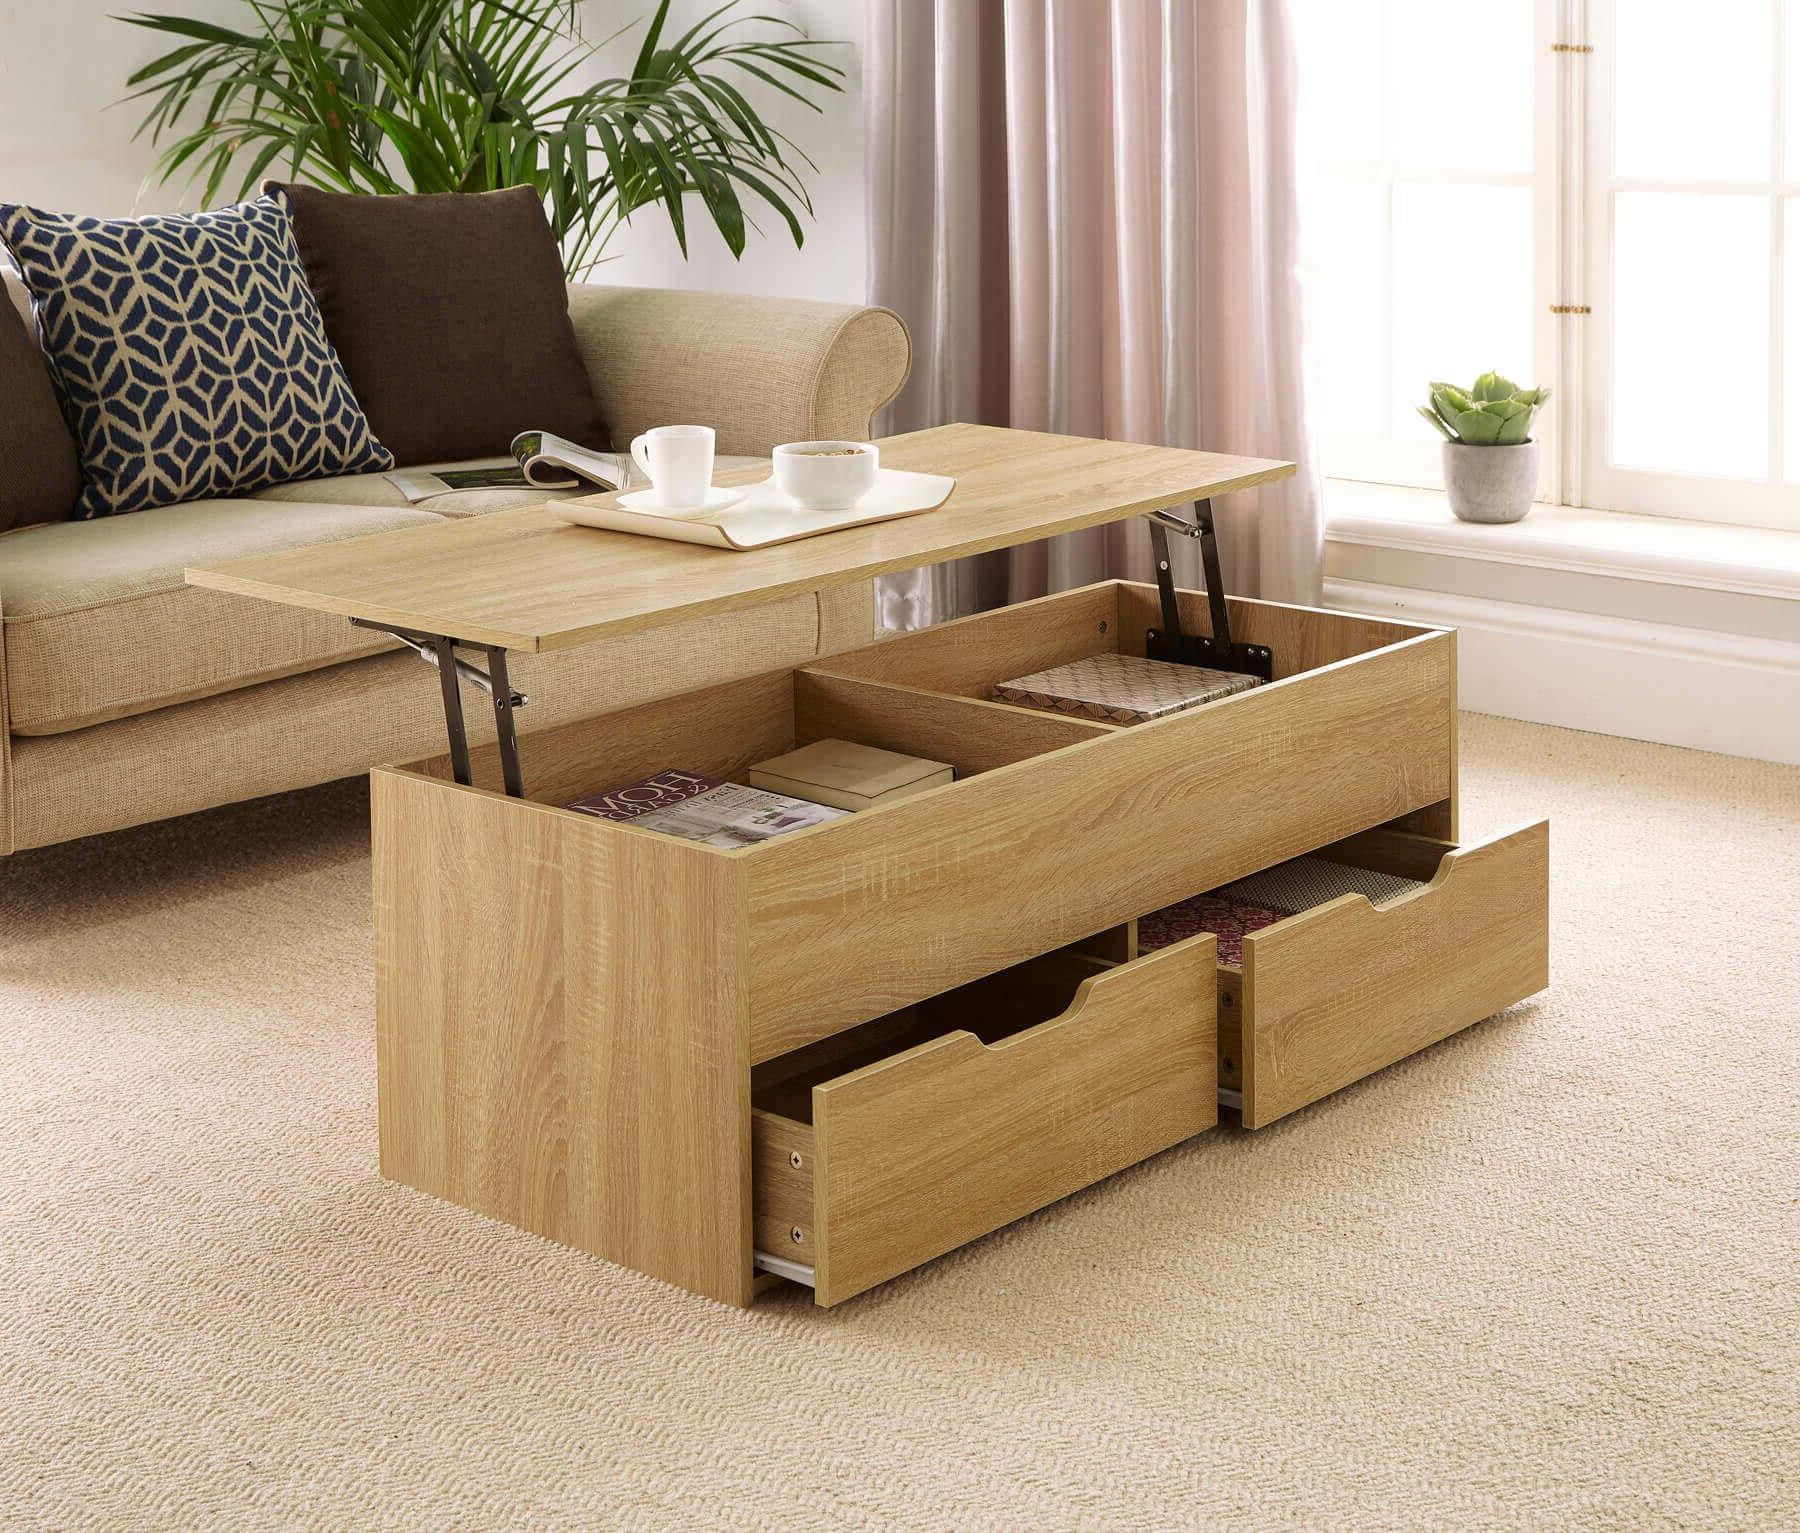 Wood Lift Top Coffee Tables In Current Oak Wooden Coffee Table With Lift Up Top And 2 Large Storage Drawers (View 14 of 15)